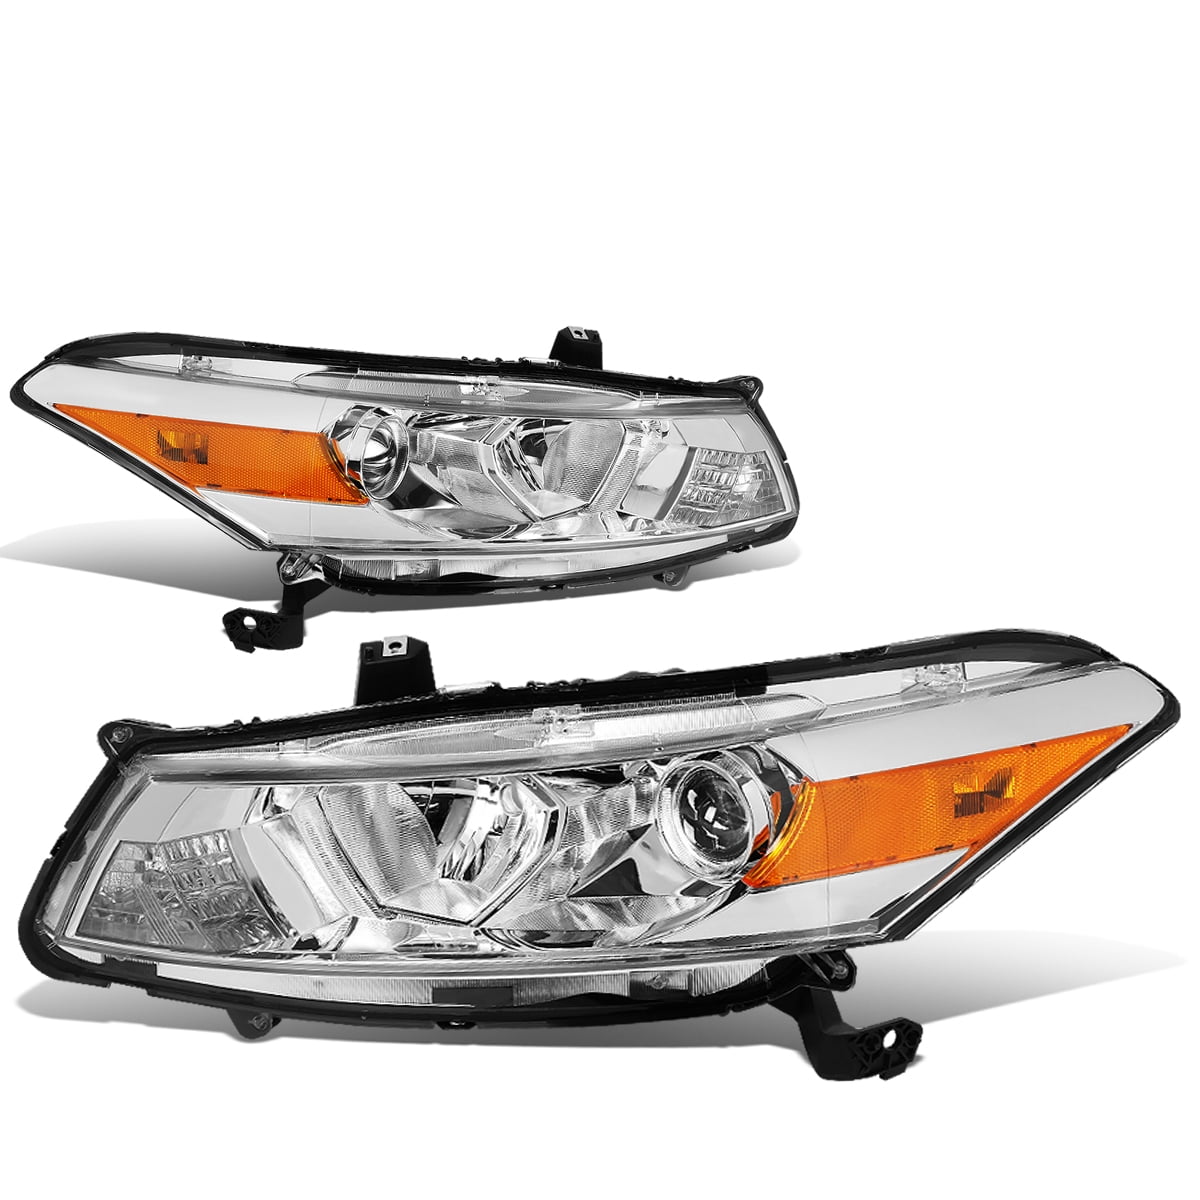 DNA Motoring HL-OH-HA082D-BK-AM-T2 Pair OE Style Front Driving Headlight/Lamp Set 